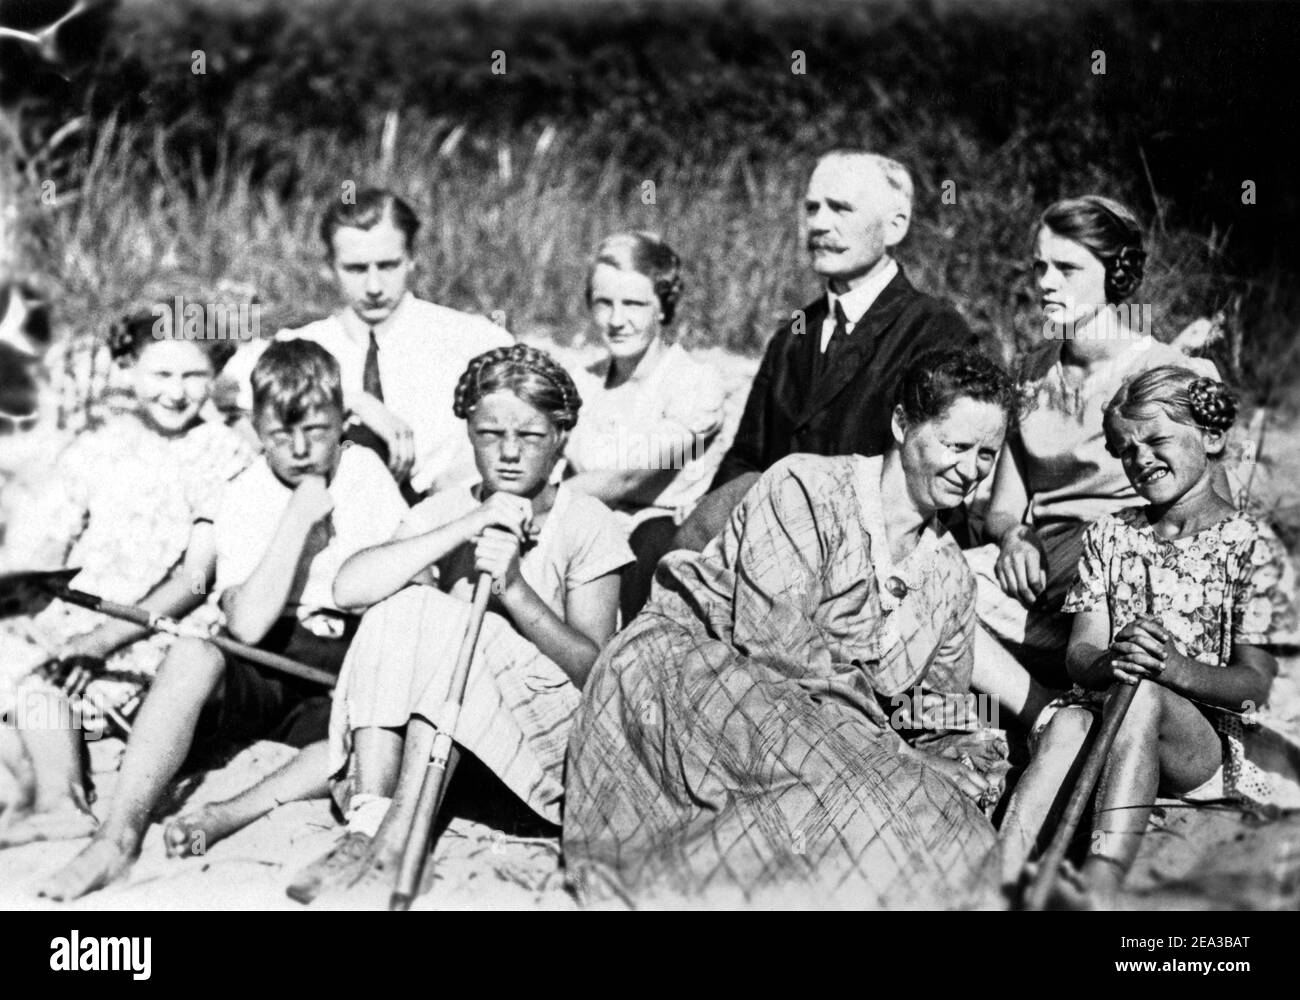 family outing, about 1930, Germany Stock Photo